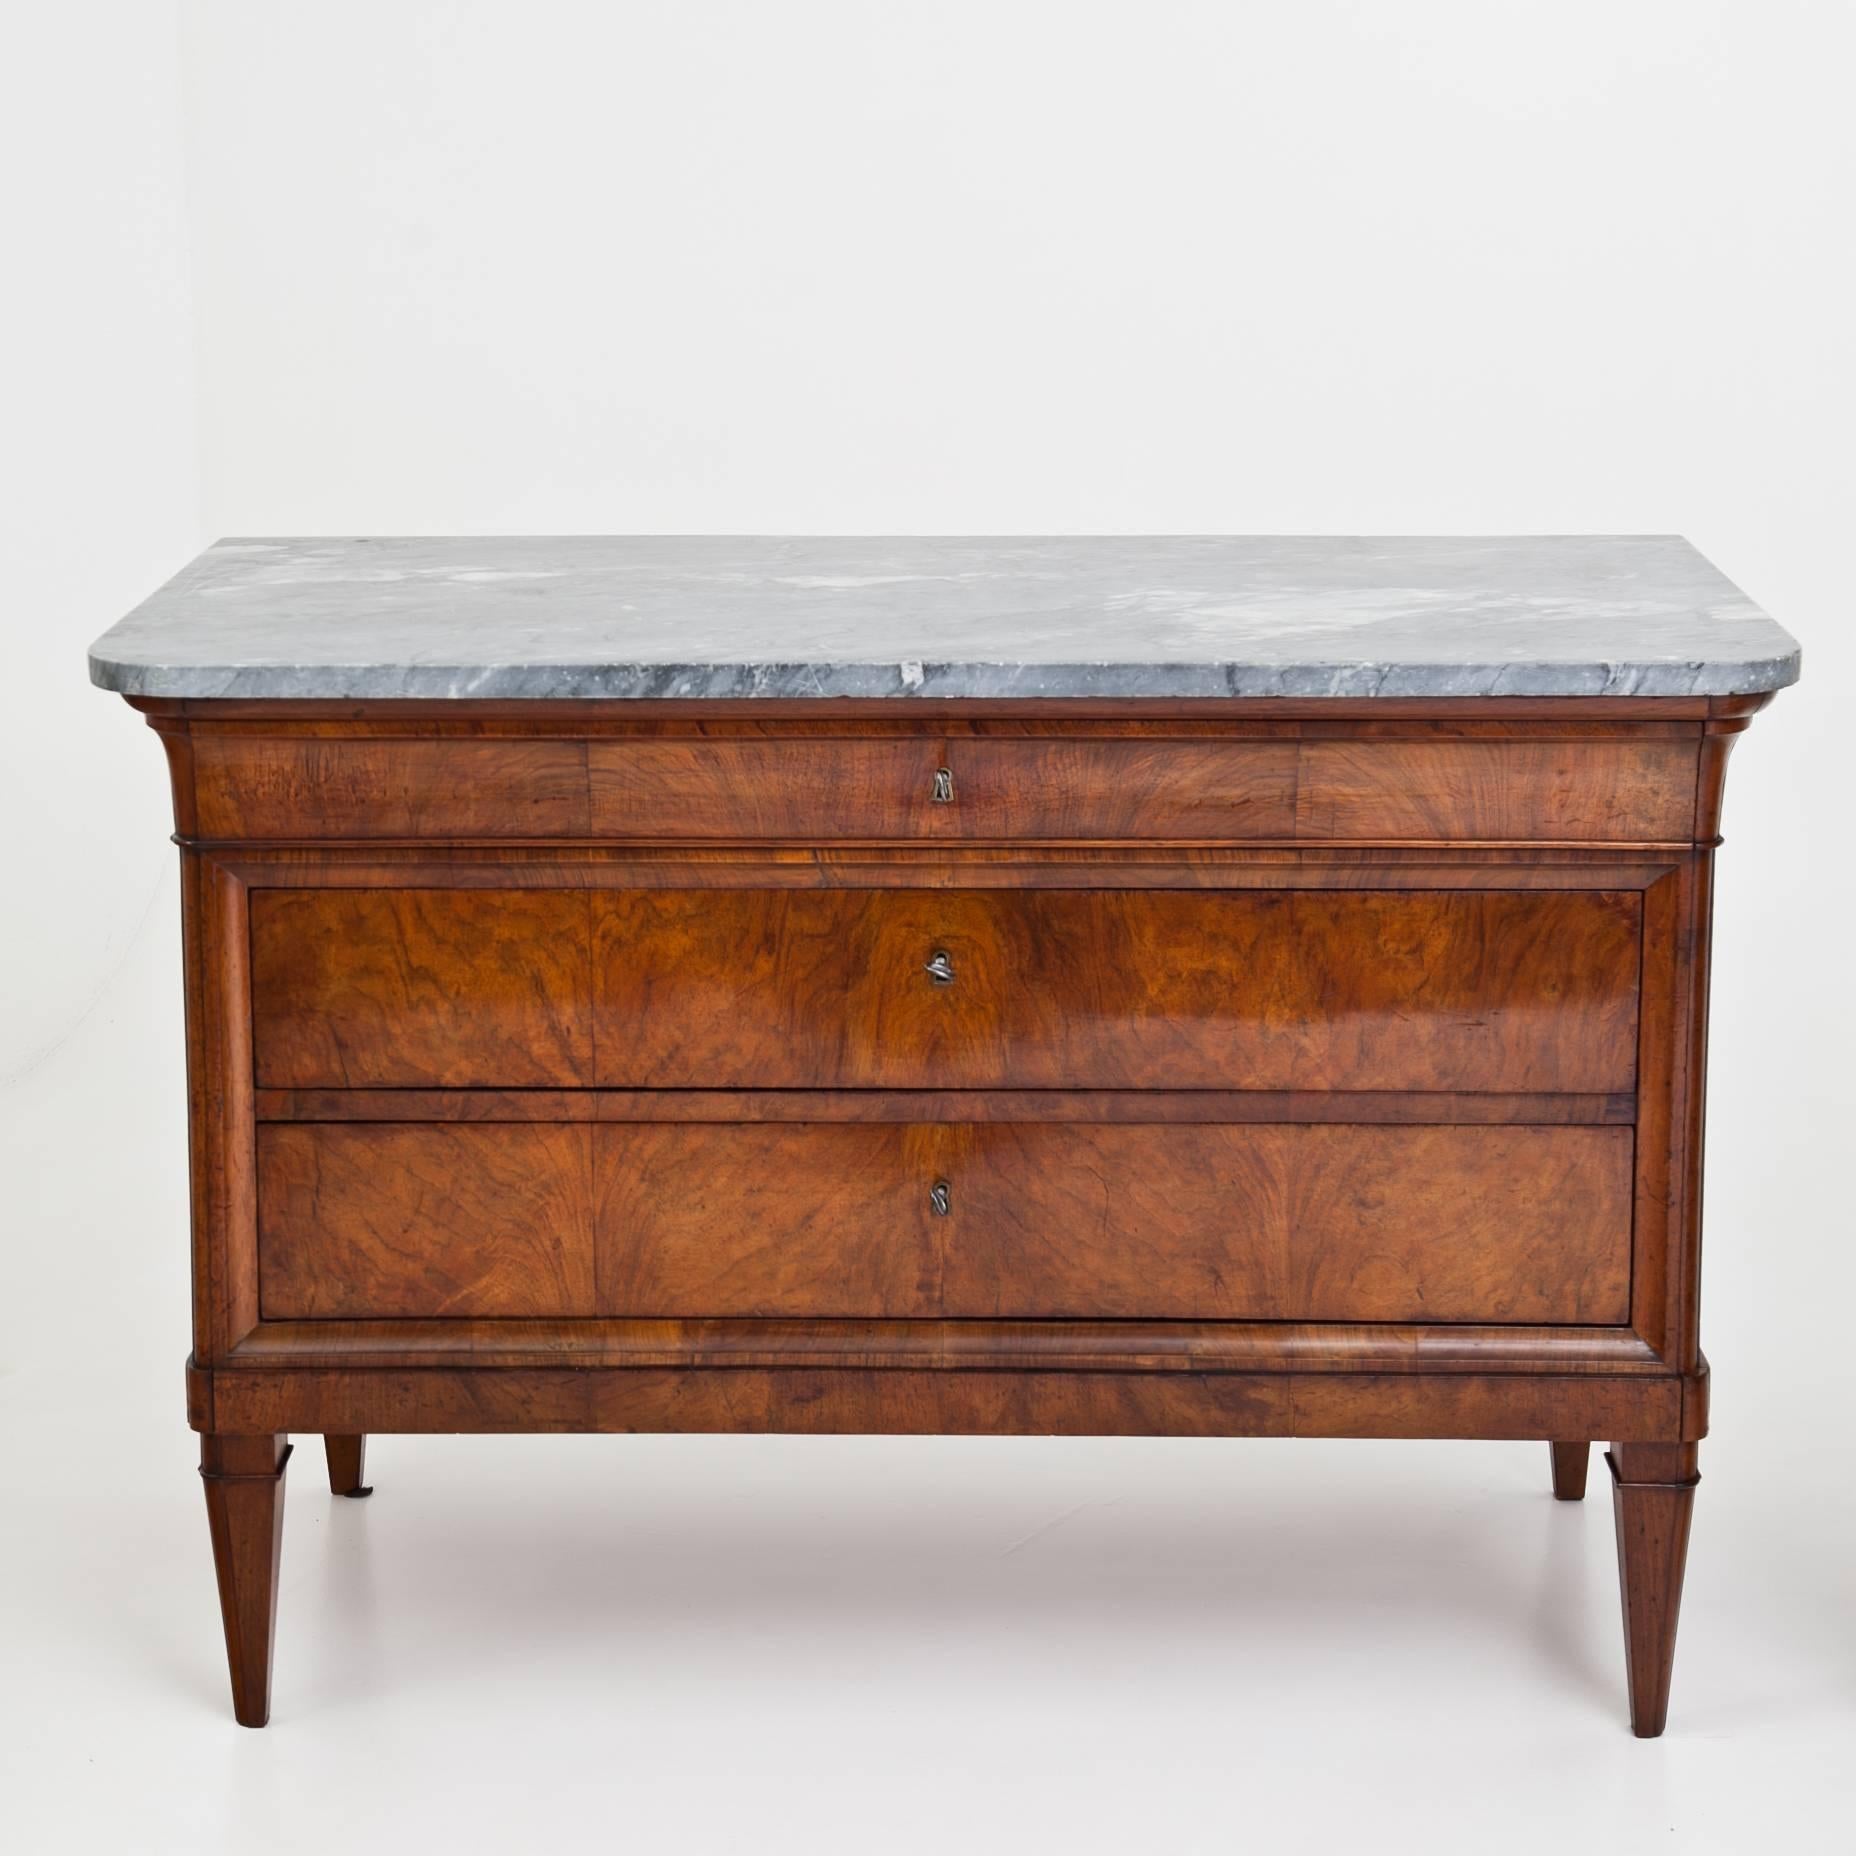 Early 19th Century Walnut Chests of Drawers, Italy, circa 1820